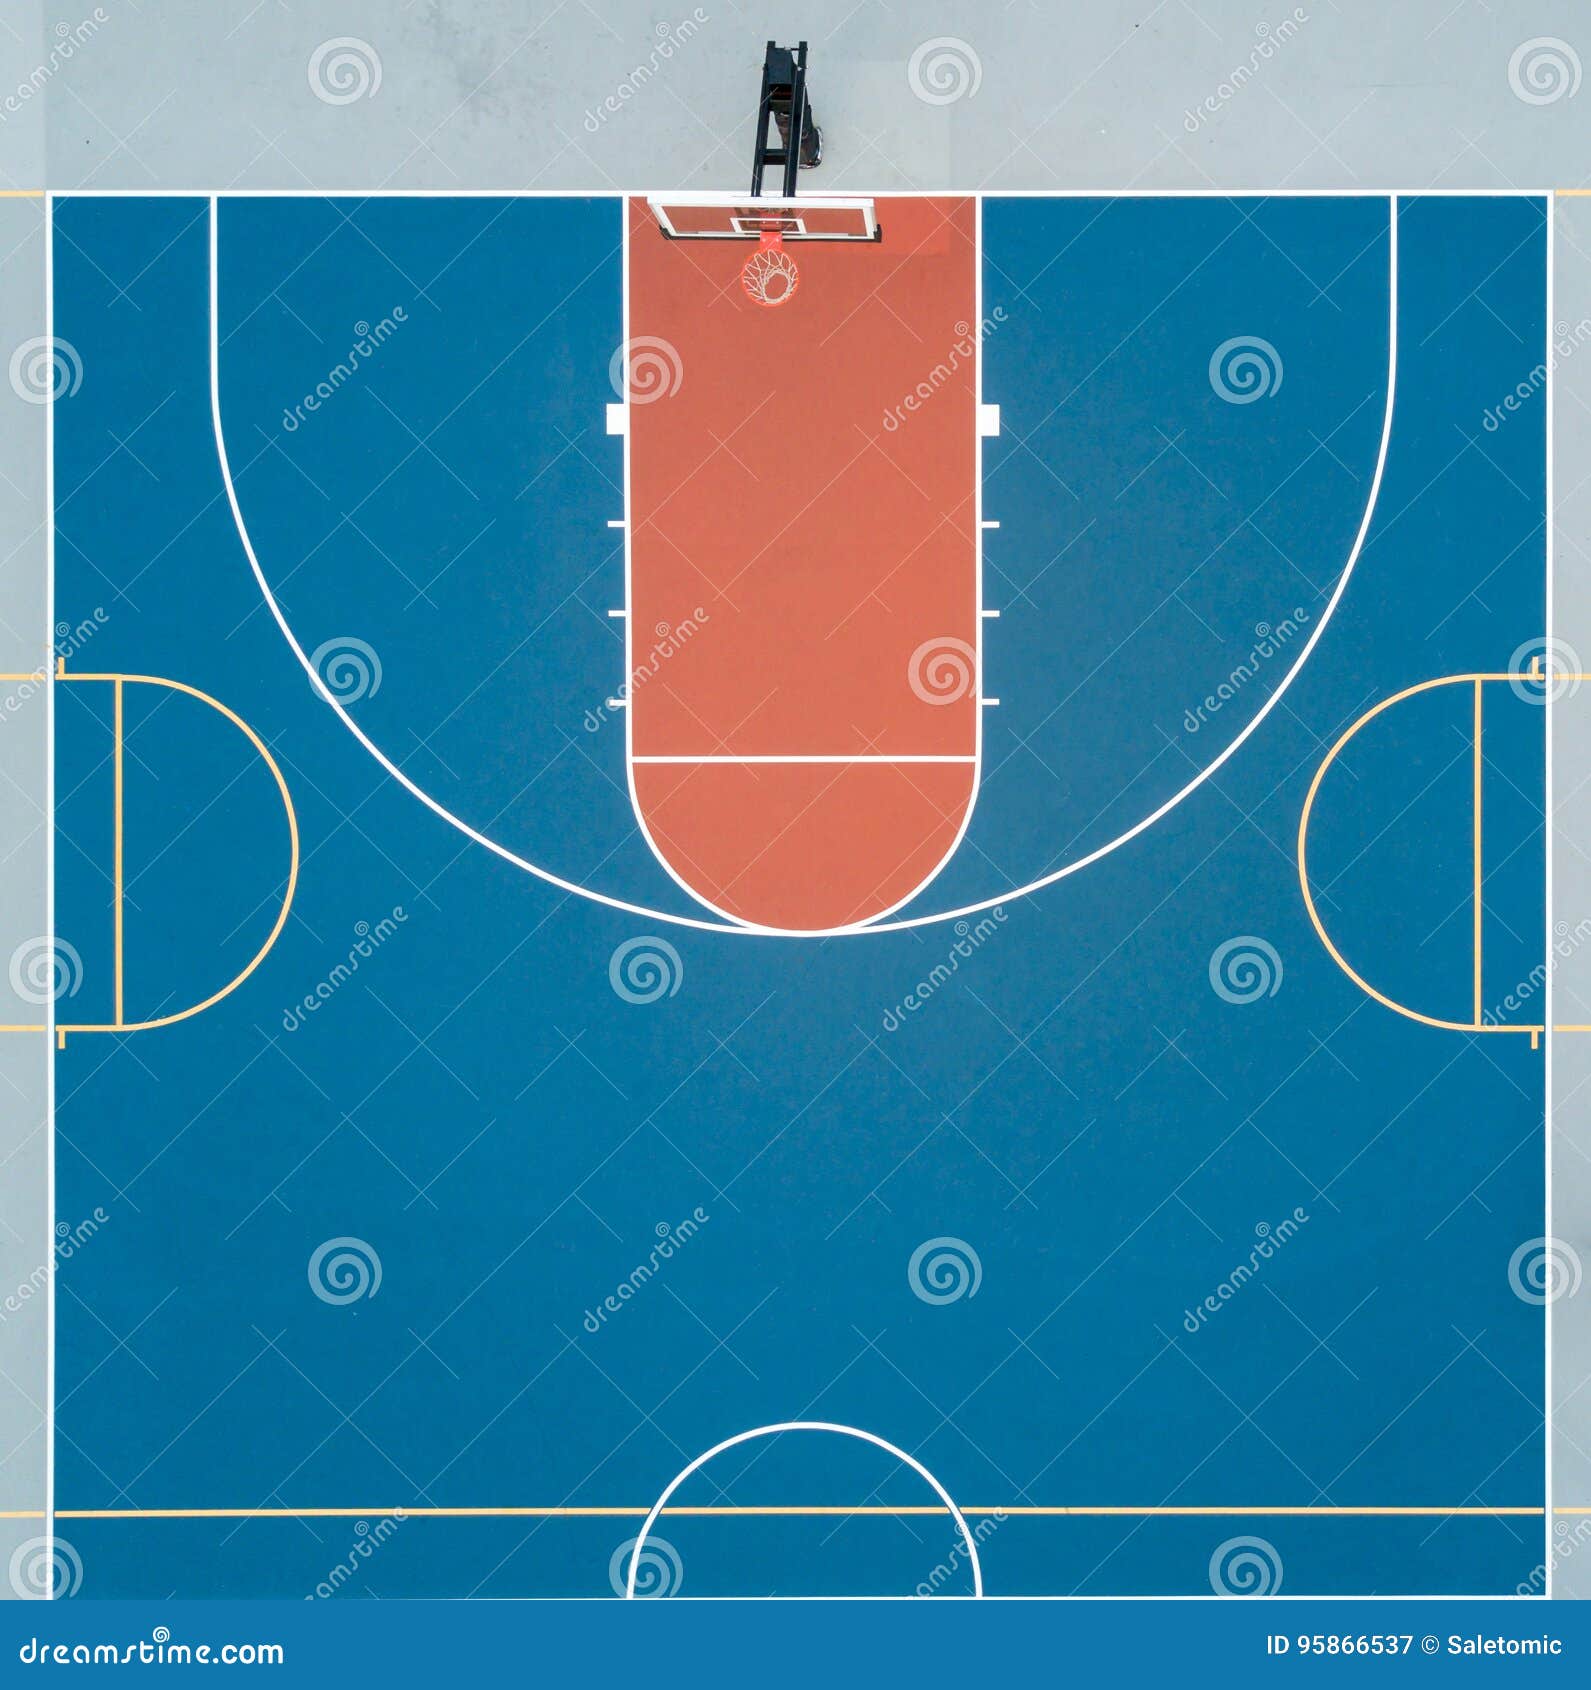 322 Half Court Basketball Stock Photos - Free & Royalty-Free Stock Photos  from Dreamstime